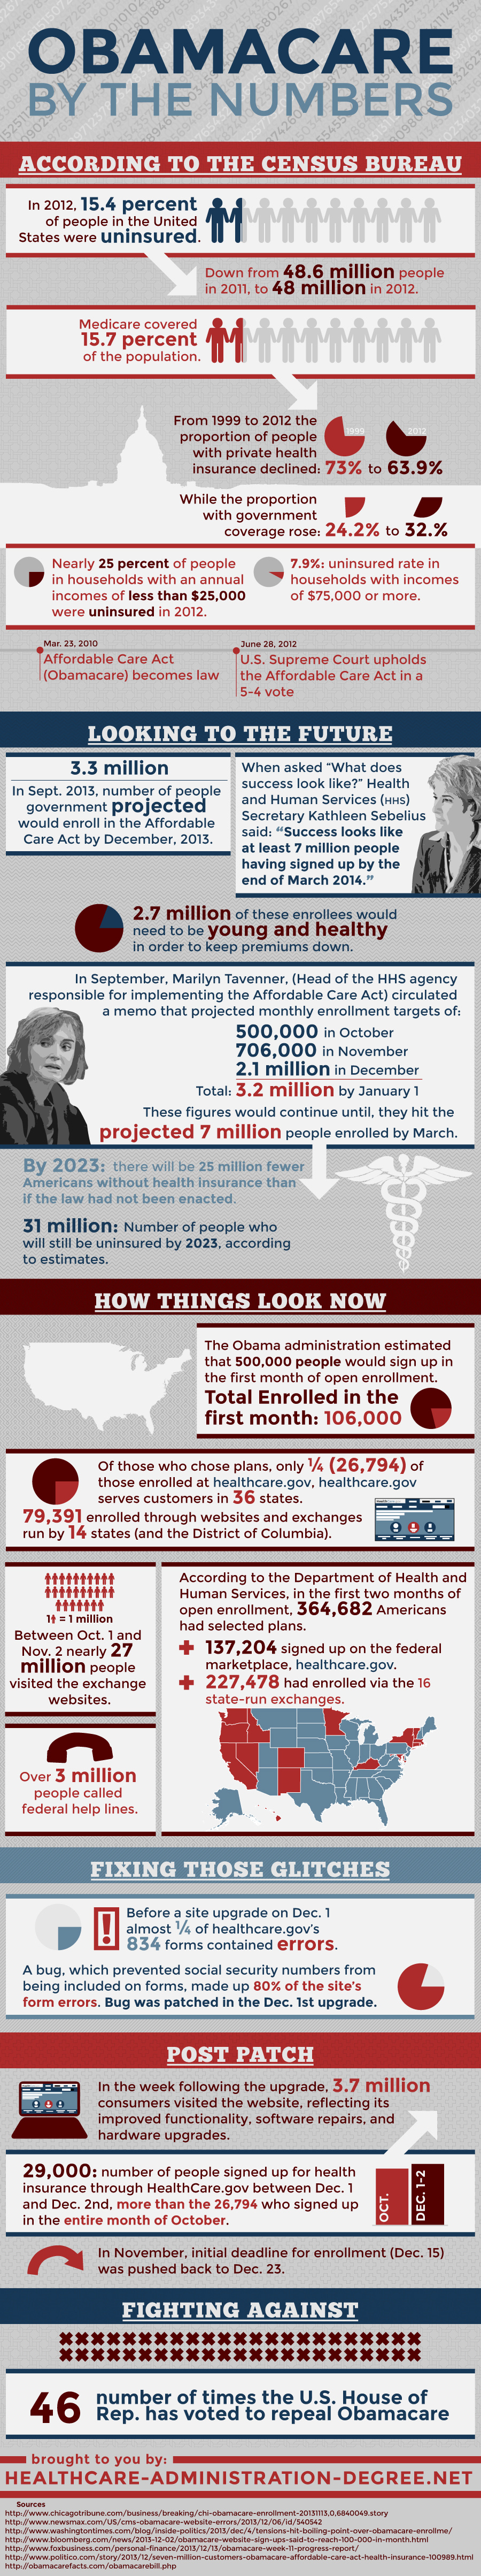 Obamacare by the Numbers